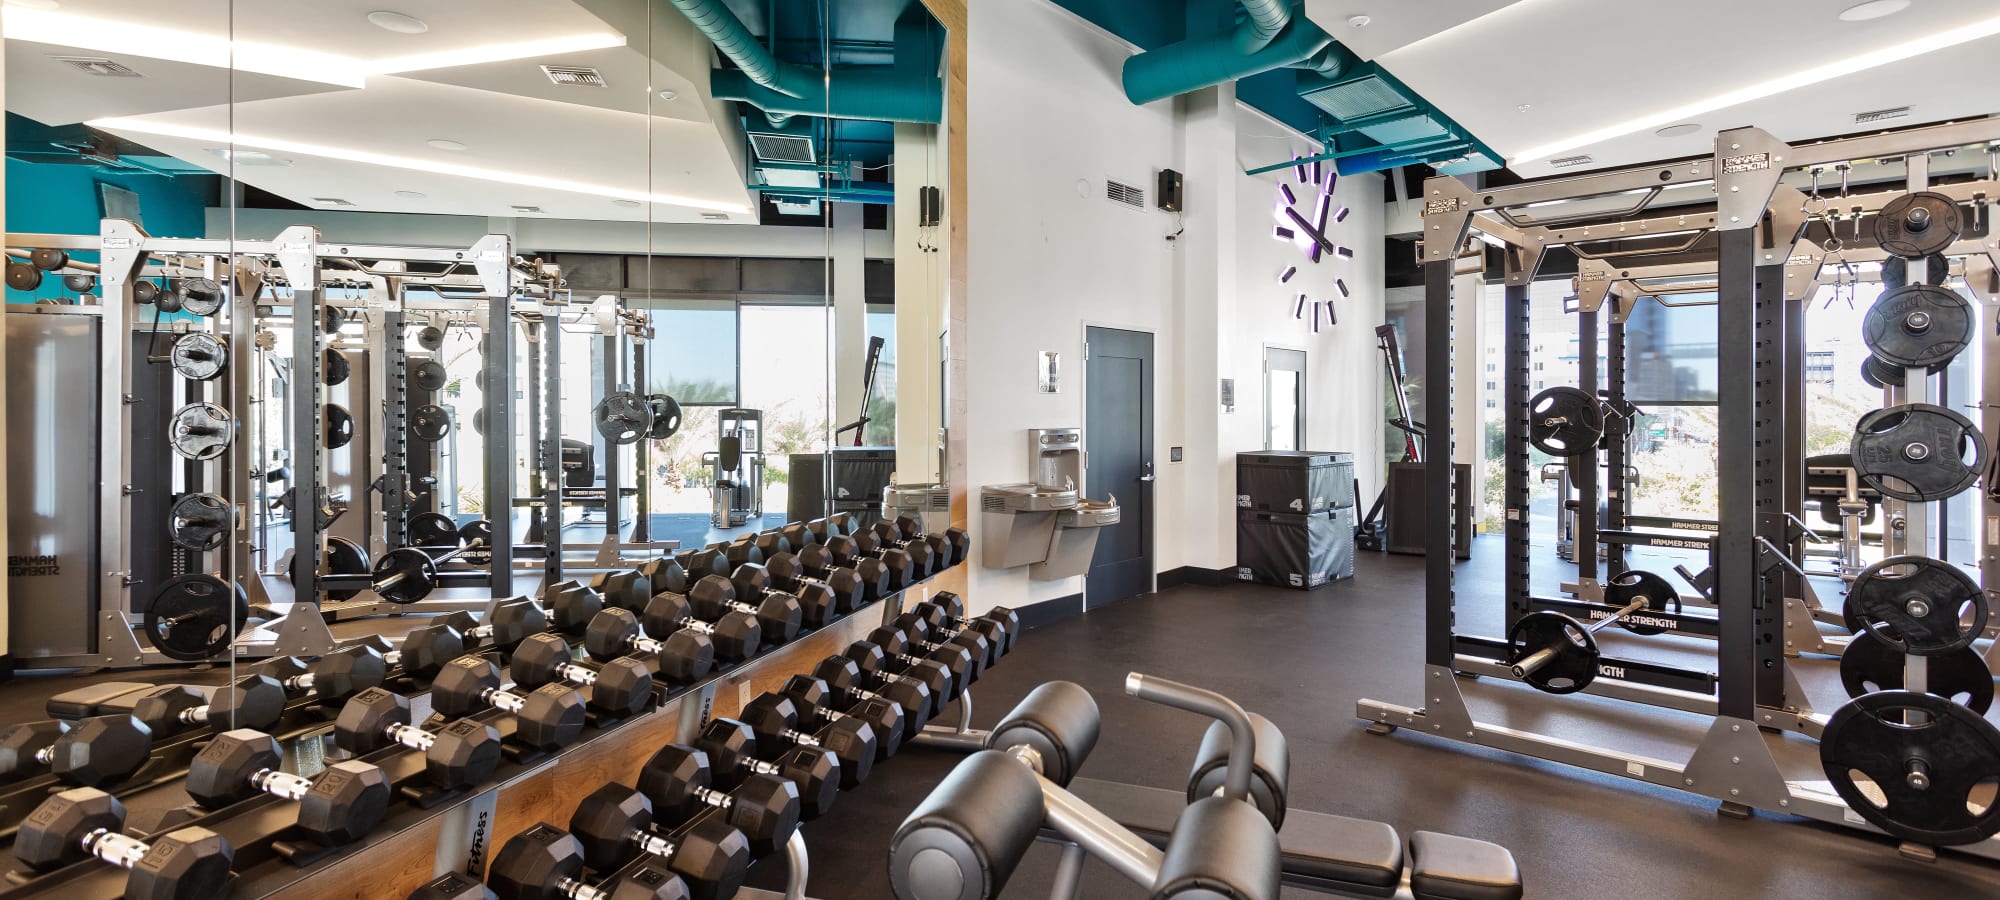 Dumbbell rack in gym at  Ten01 on the Lake in Tempe, Arizona